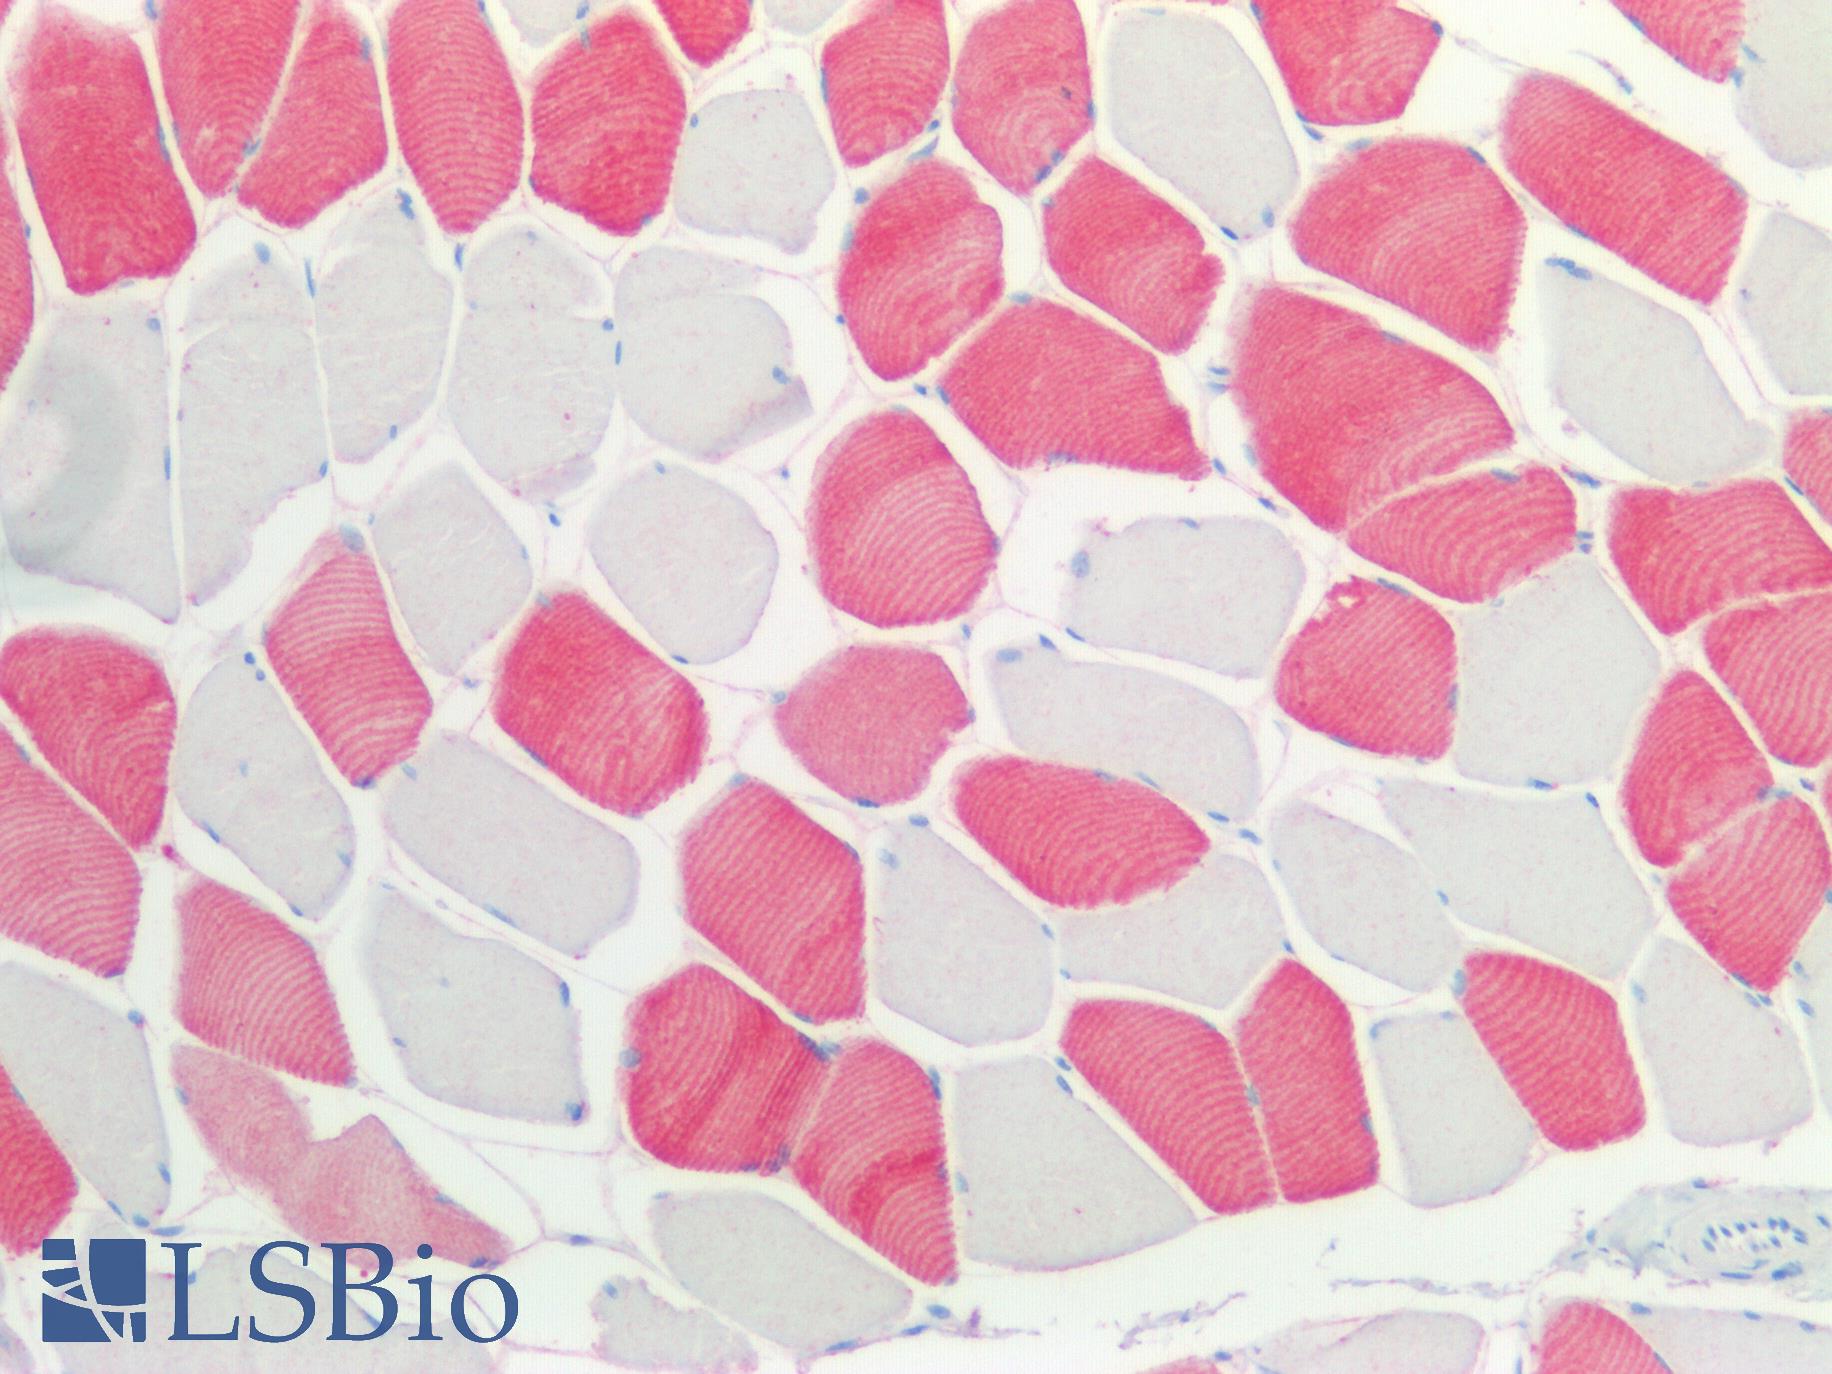 MYH1 Antibody - Human Skeletal Muscle: Formalin-Fixed, Paraffin-Embedded (FFPE)